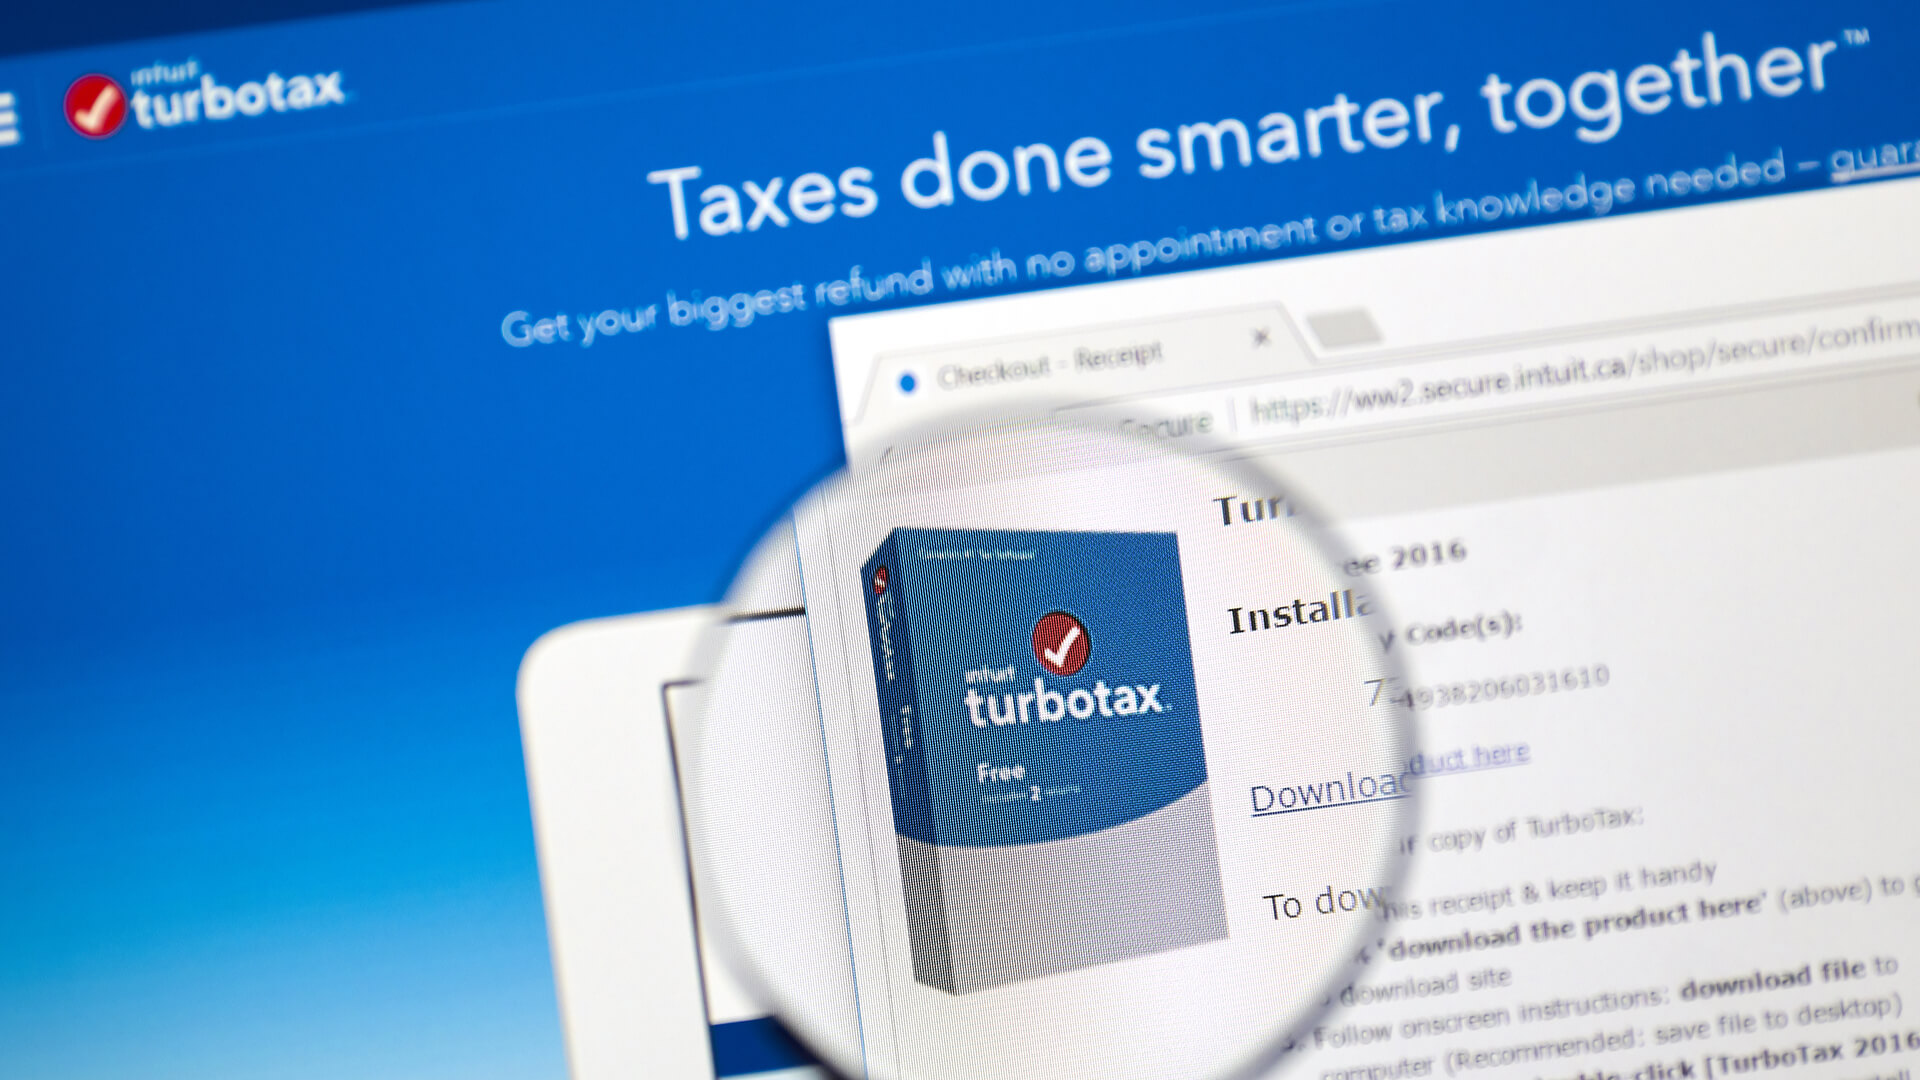 turbotax review before file